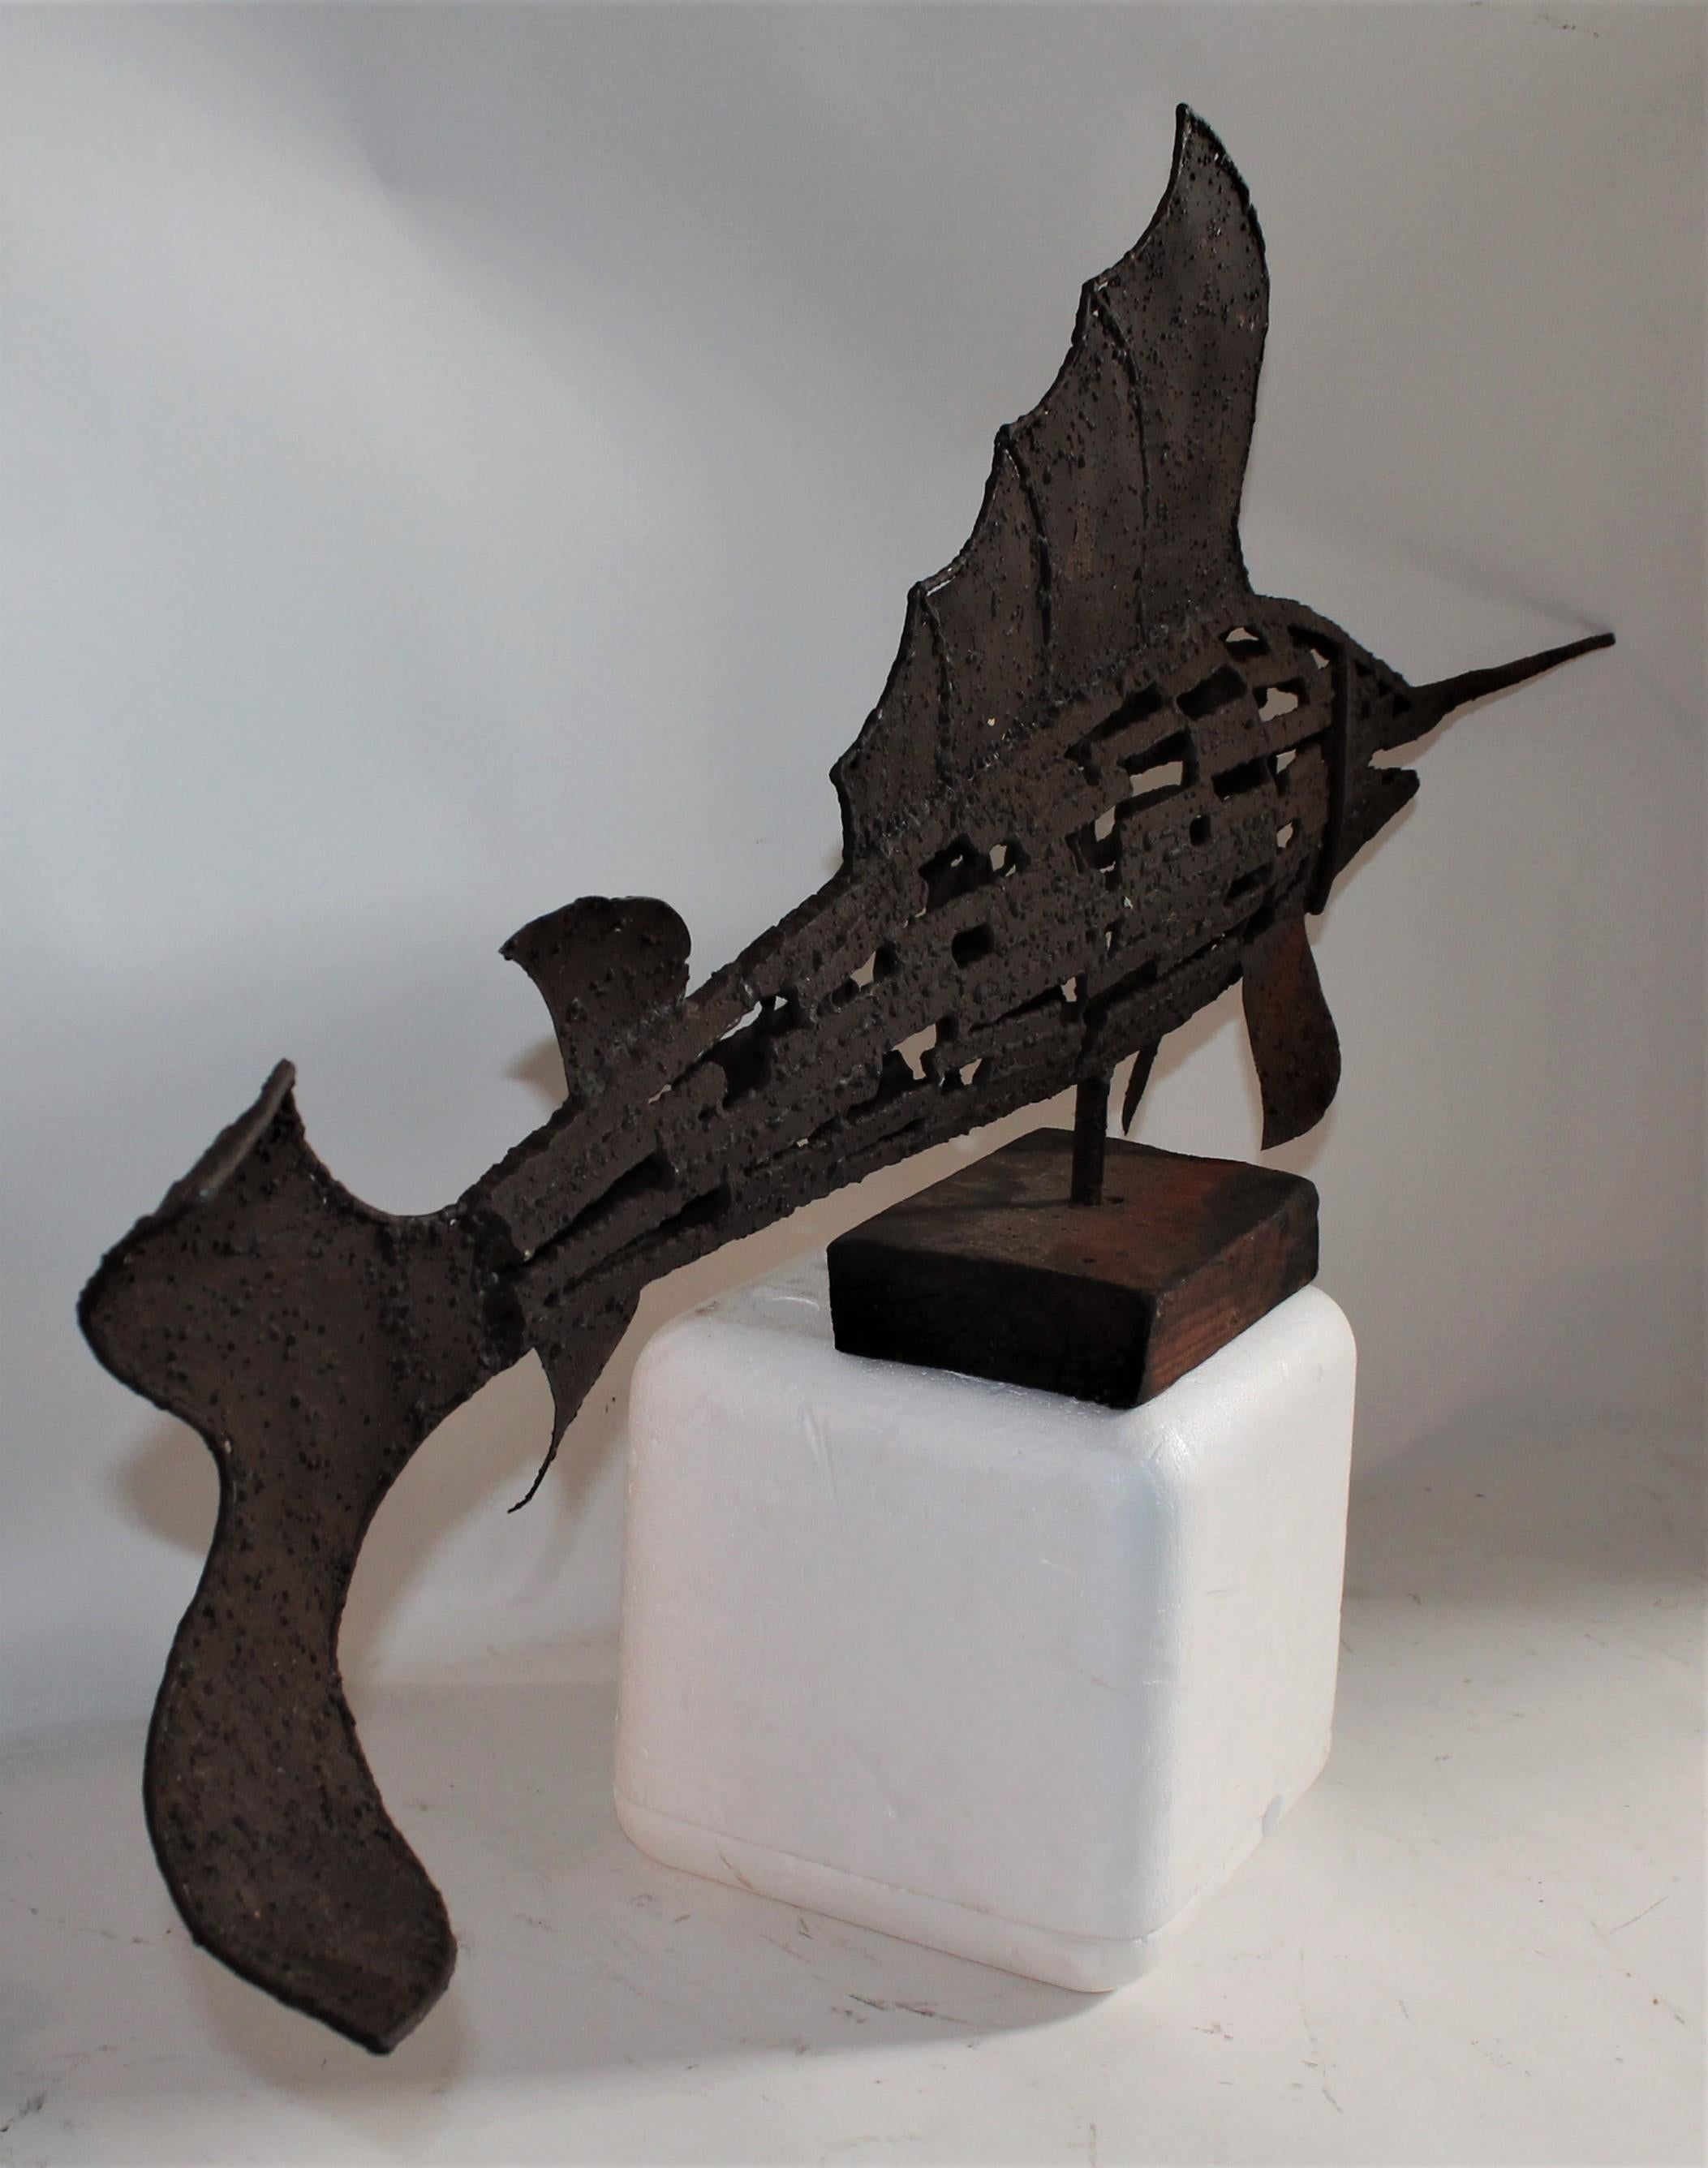 Early 20th century swordfish folk sculpture in good condition on original wood block base. This cast iron handmade sculpture is in great condition and very heavy. Resembles a large handmade weather vane. Great form!